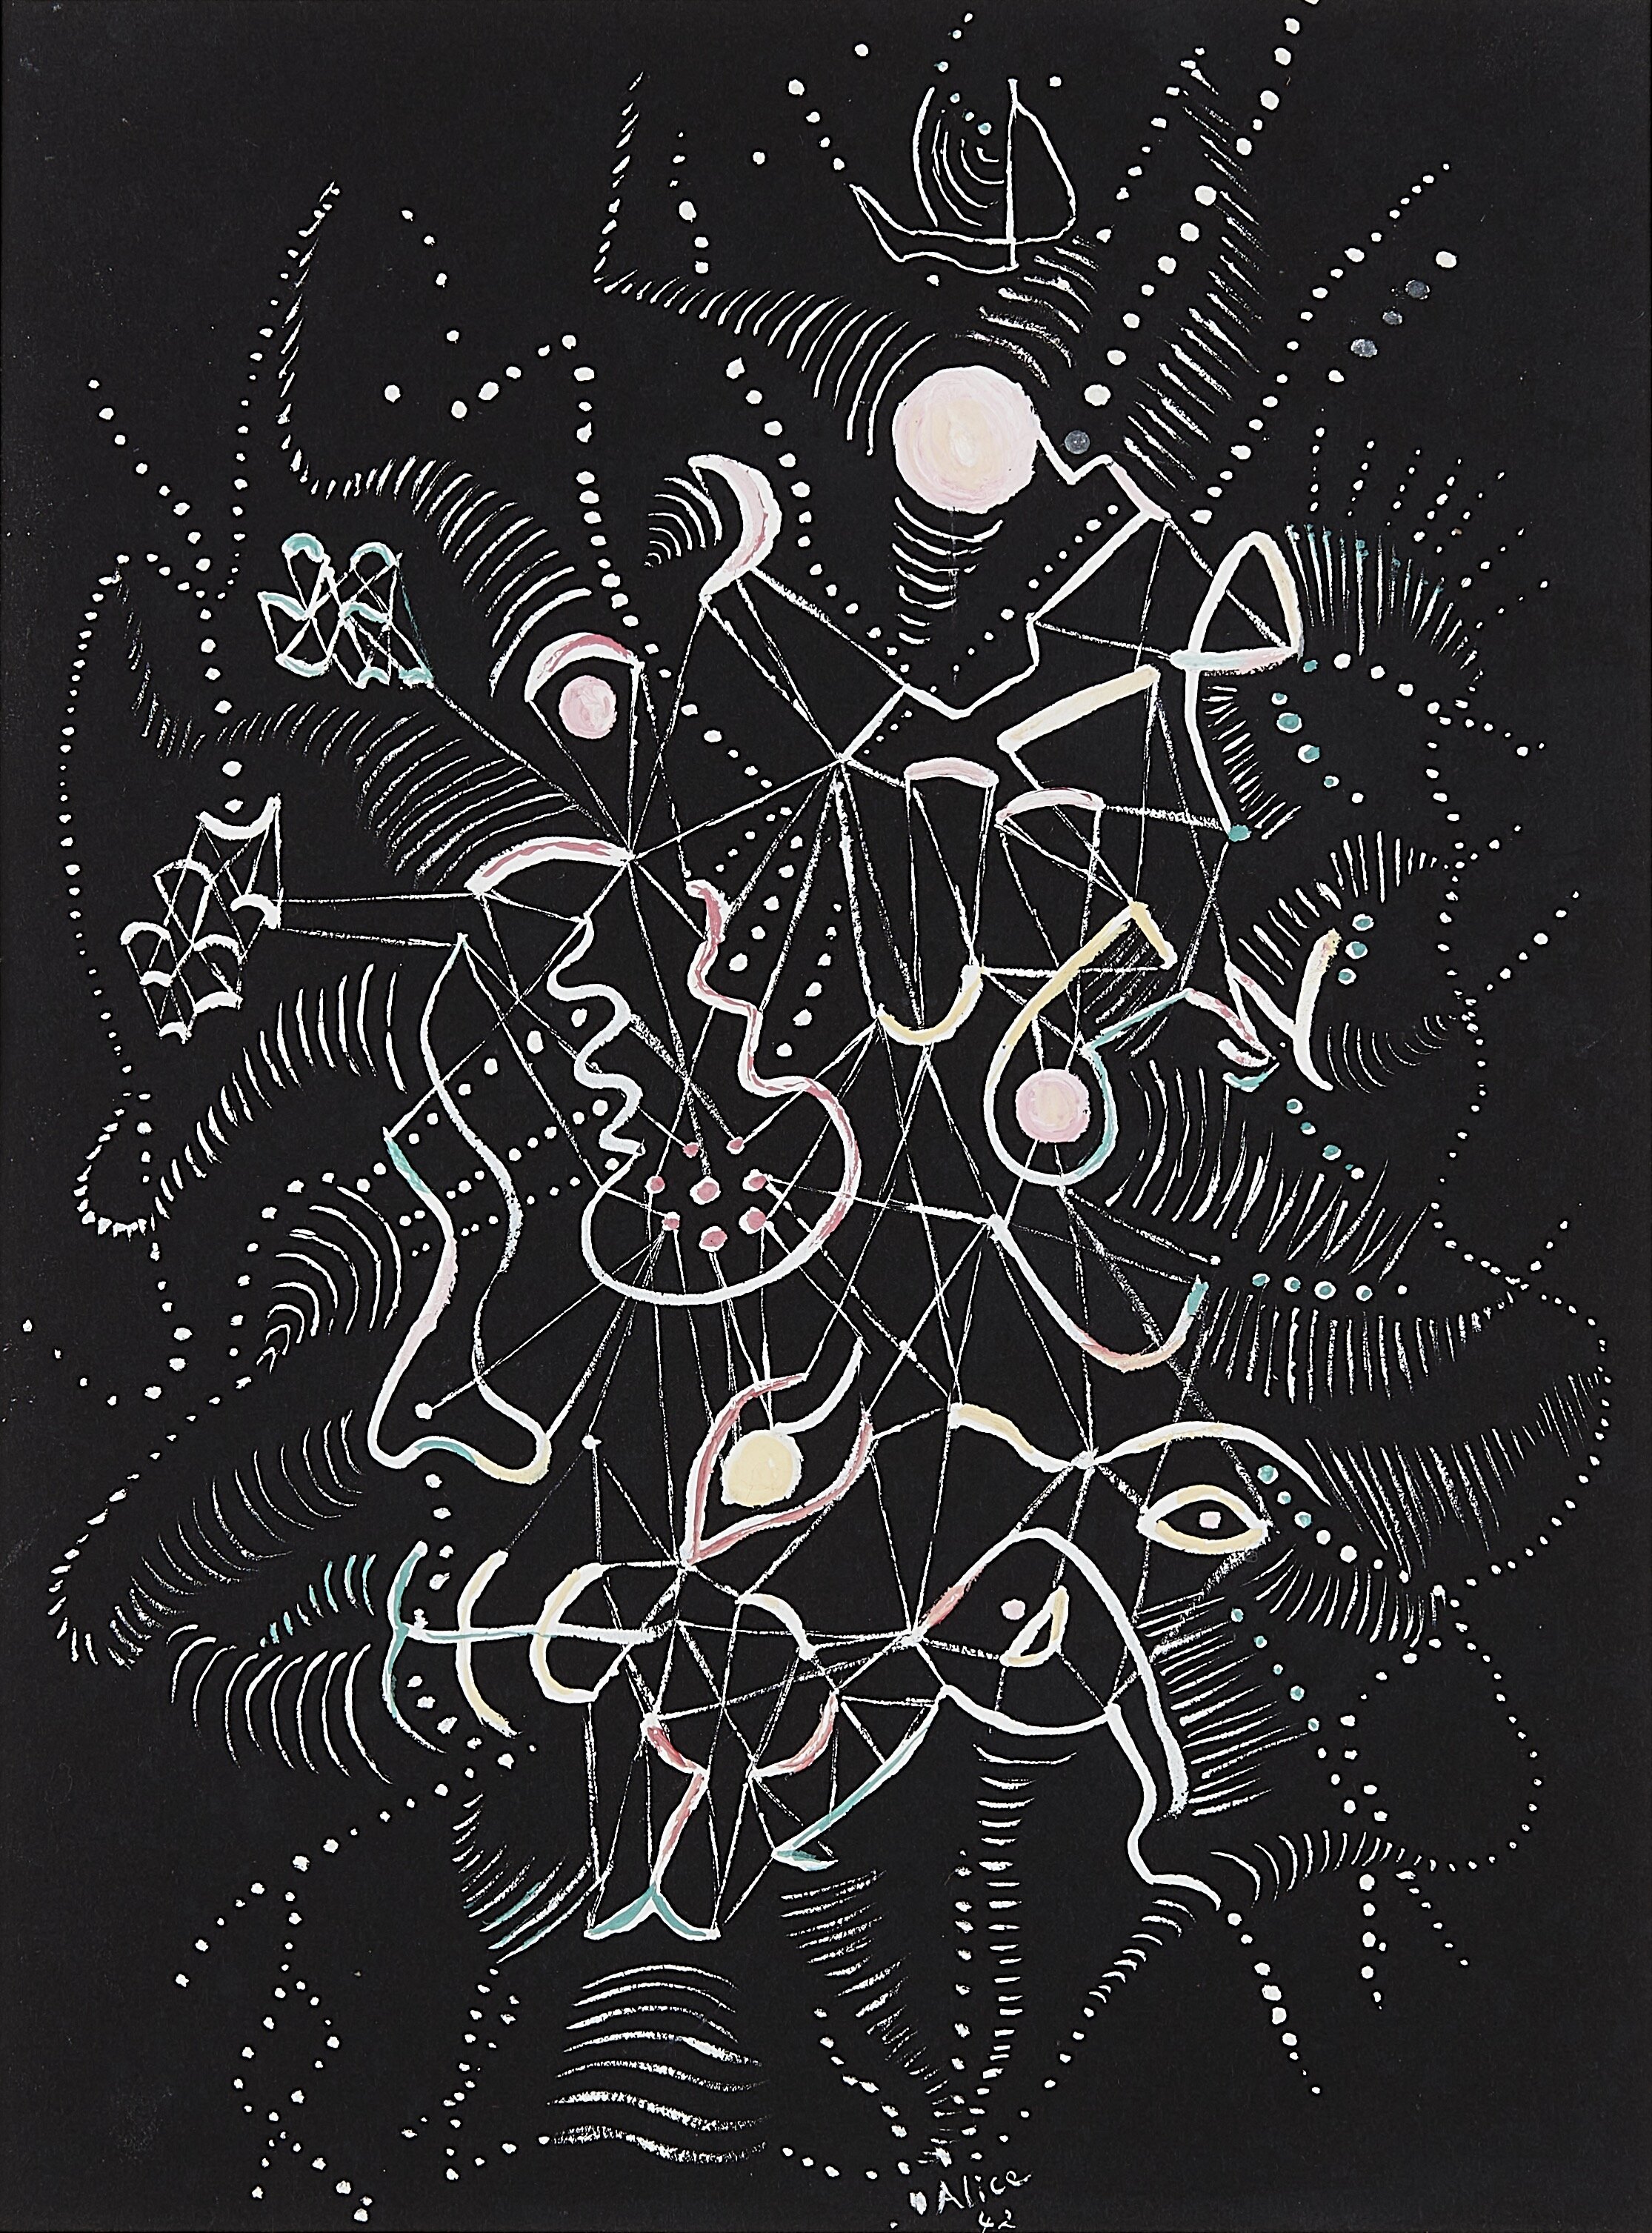  Alice Rahon,  Mozart (from the Crystals in Space series) , 1942, gouache on paper, 8 1/8 x 6 1/8 inches (20.6 x 15.5 cm) 